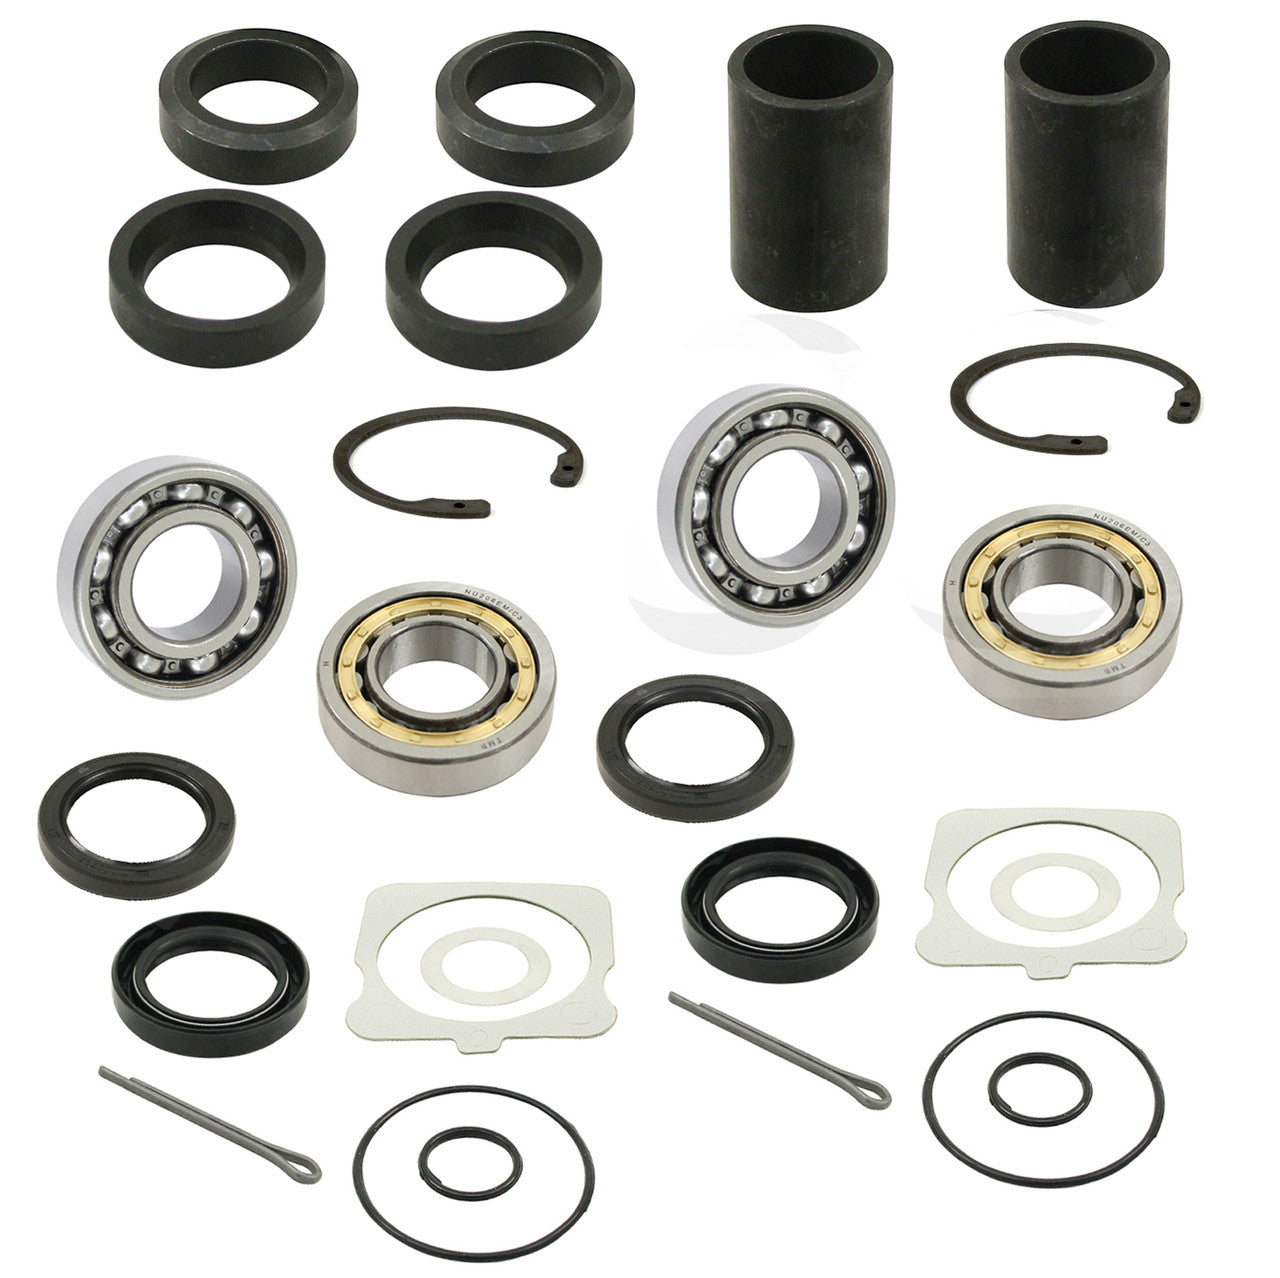 Rear IRS Bearing Kit With Seals, Clips & Spacers Vw Bug / Ghia 1968-1979